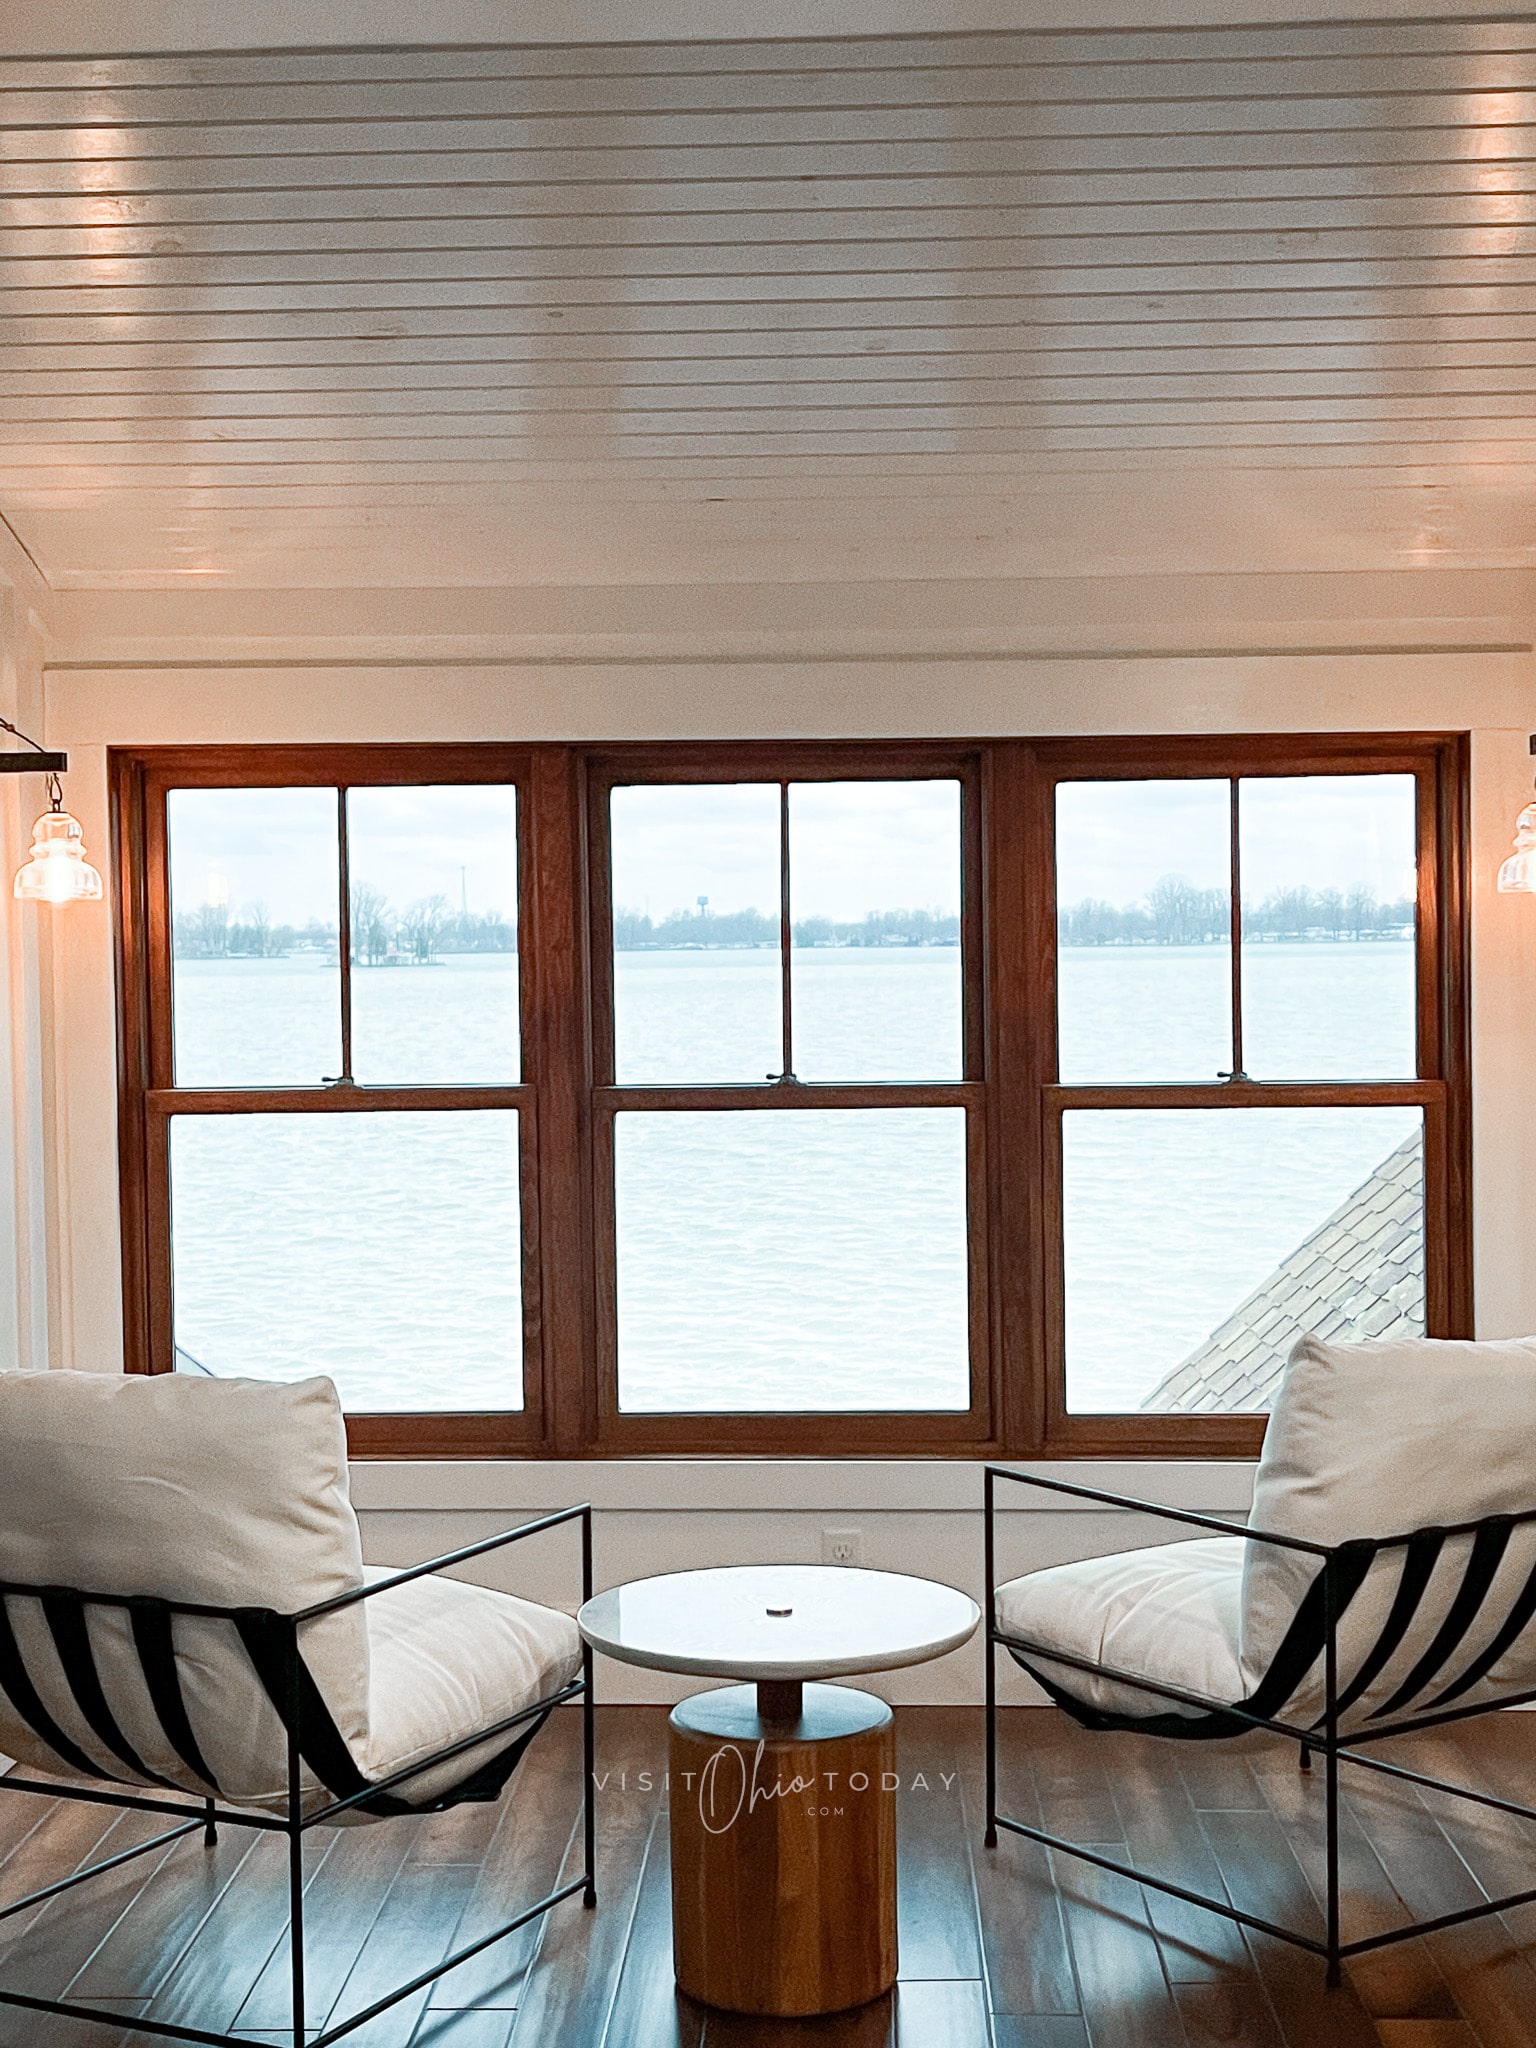 white celing and walls, three windows looking out to lake. two black chairs with white cushions in front of window